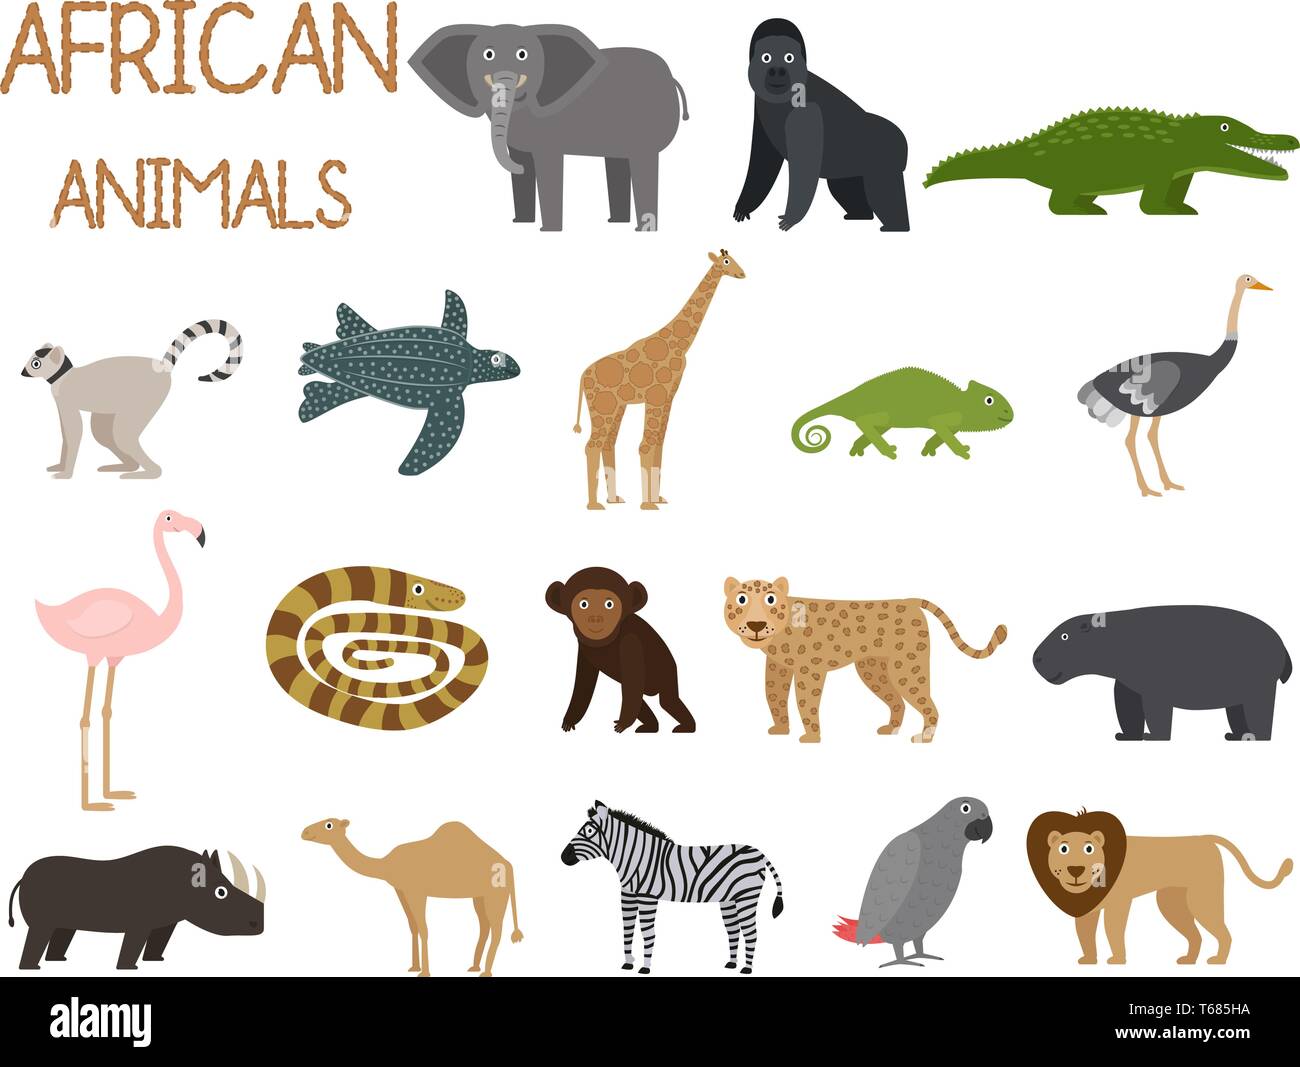 African animals set of icons in flat style, African fauna, elephant, rhino, lion, parrot, etc. vector illustration Stock Vector